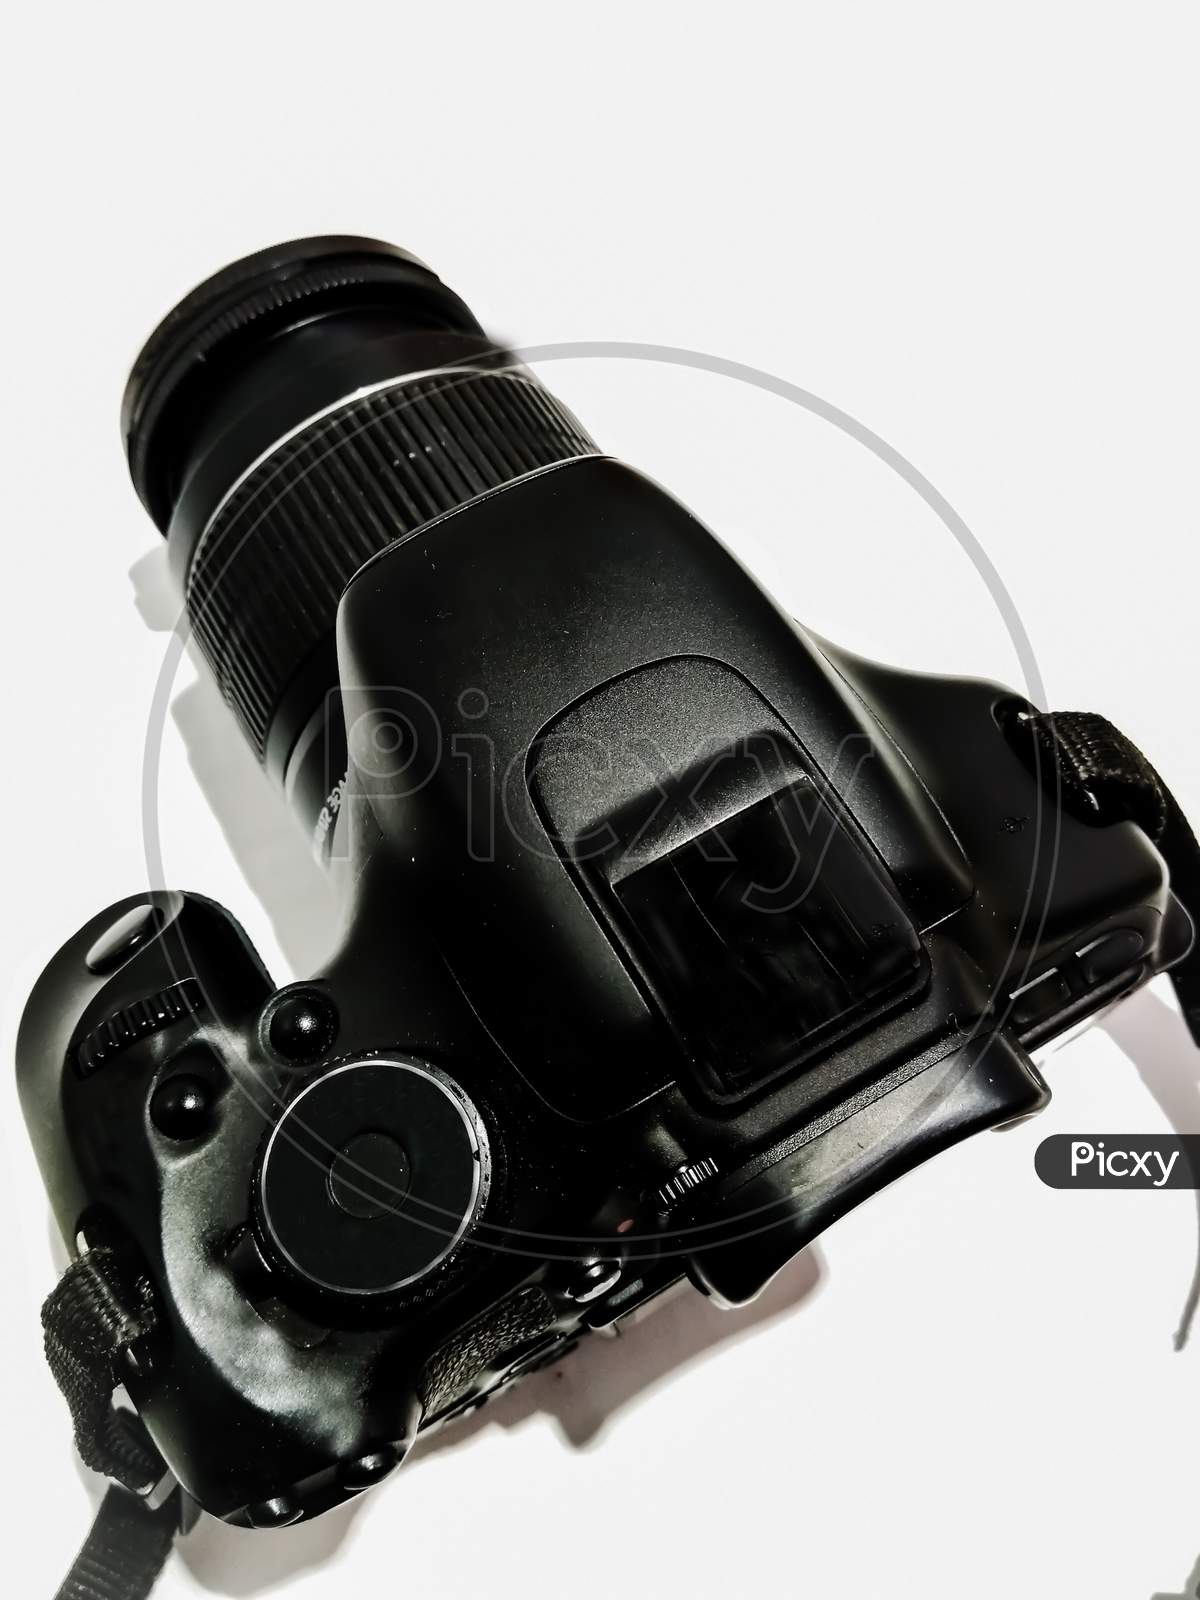 A picture of dslr on white background